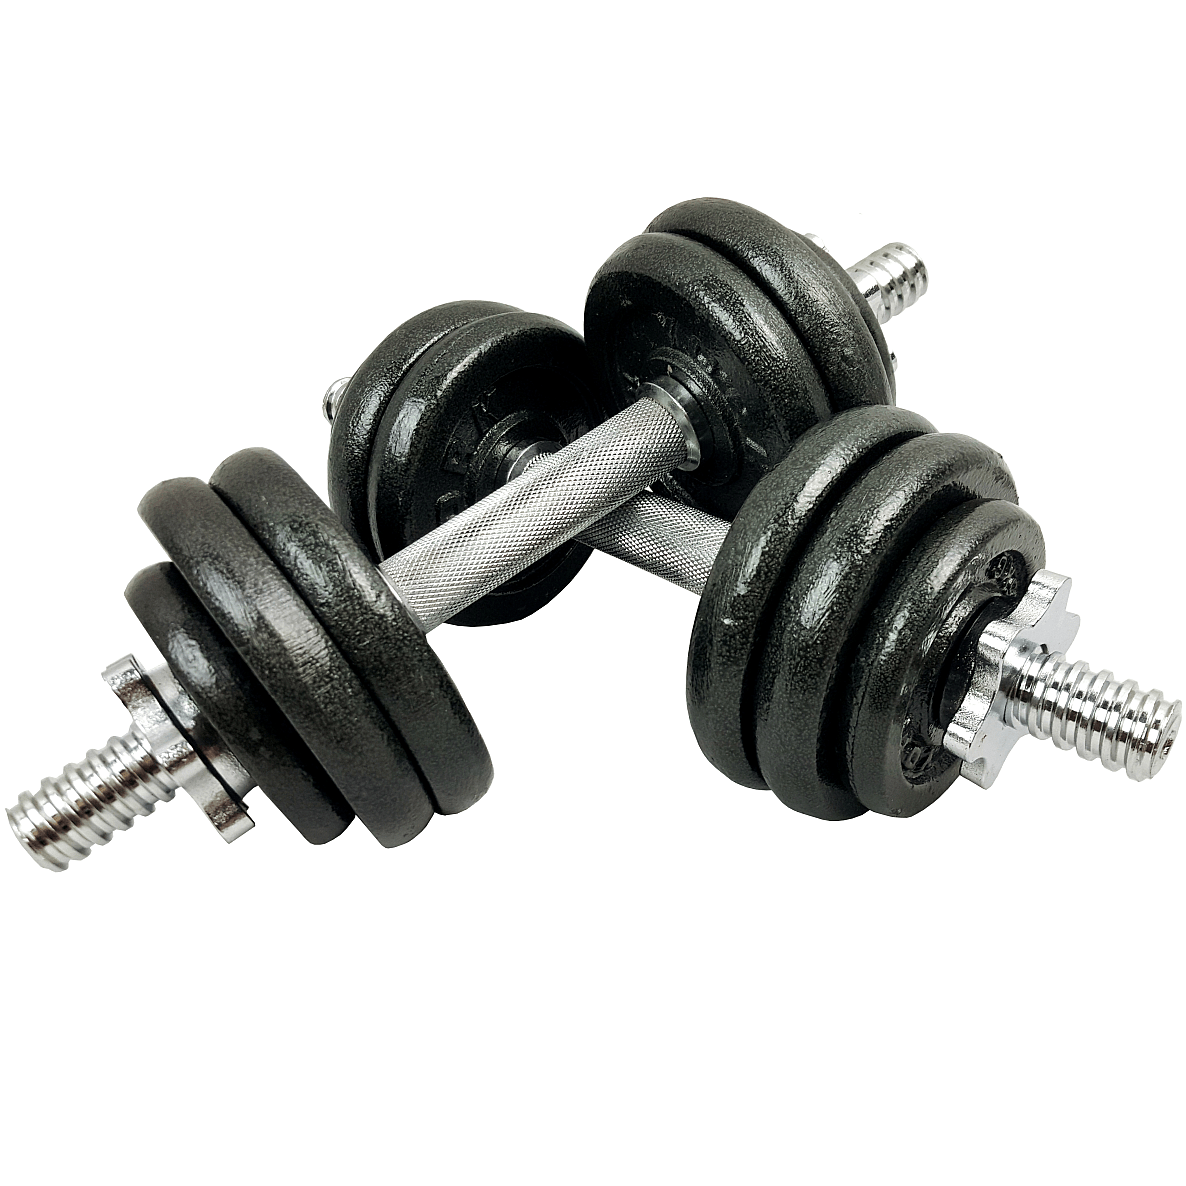 15 Kg Dumbbell Set With Case The Fitness 15 Kg Cast Iron Dumbbell Set Is Designed For Home Toning And Strength Workout Usage. The Traditional 1&Quot; Standard Cast Plate Design Is Easy To Pick Up And Load Onto The Bars With The Quality Spinlock Collars Ensuring A Safe And Secure Fit On The Bar, Along With Quick Plate Changes. The Knurled Black Dumbbell Sleeves Ensures A Great Grip Whilst Working Out. The Dumbbell Set Can Be Used For A Wide Range Of Exercises To Help Pump Your Muscles And Tone Your Arms. The Set Lets You Adjust The Lifting Weight Up To A Maximum Of Two 7.5 Kg Dumbbells. Dumbbell Set 15 Kg With Packing Case Dumbbell Set 15 Kg With Packing Case